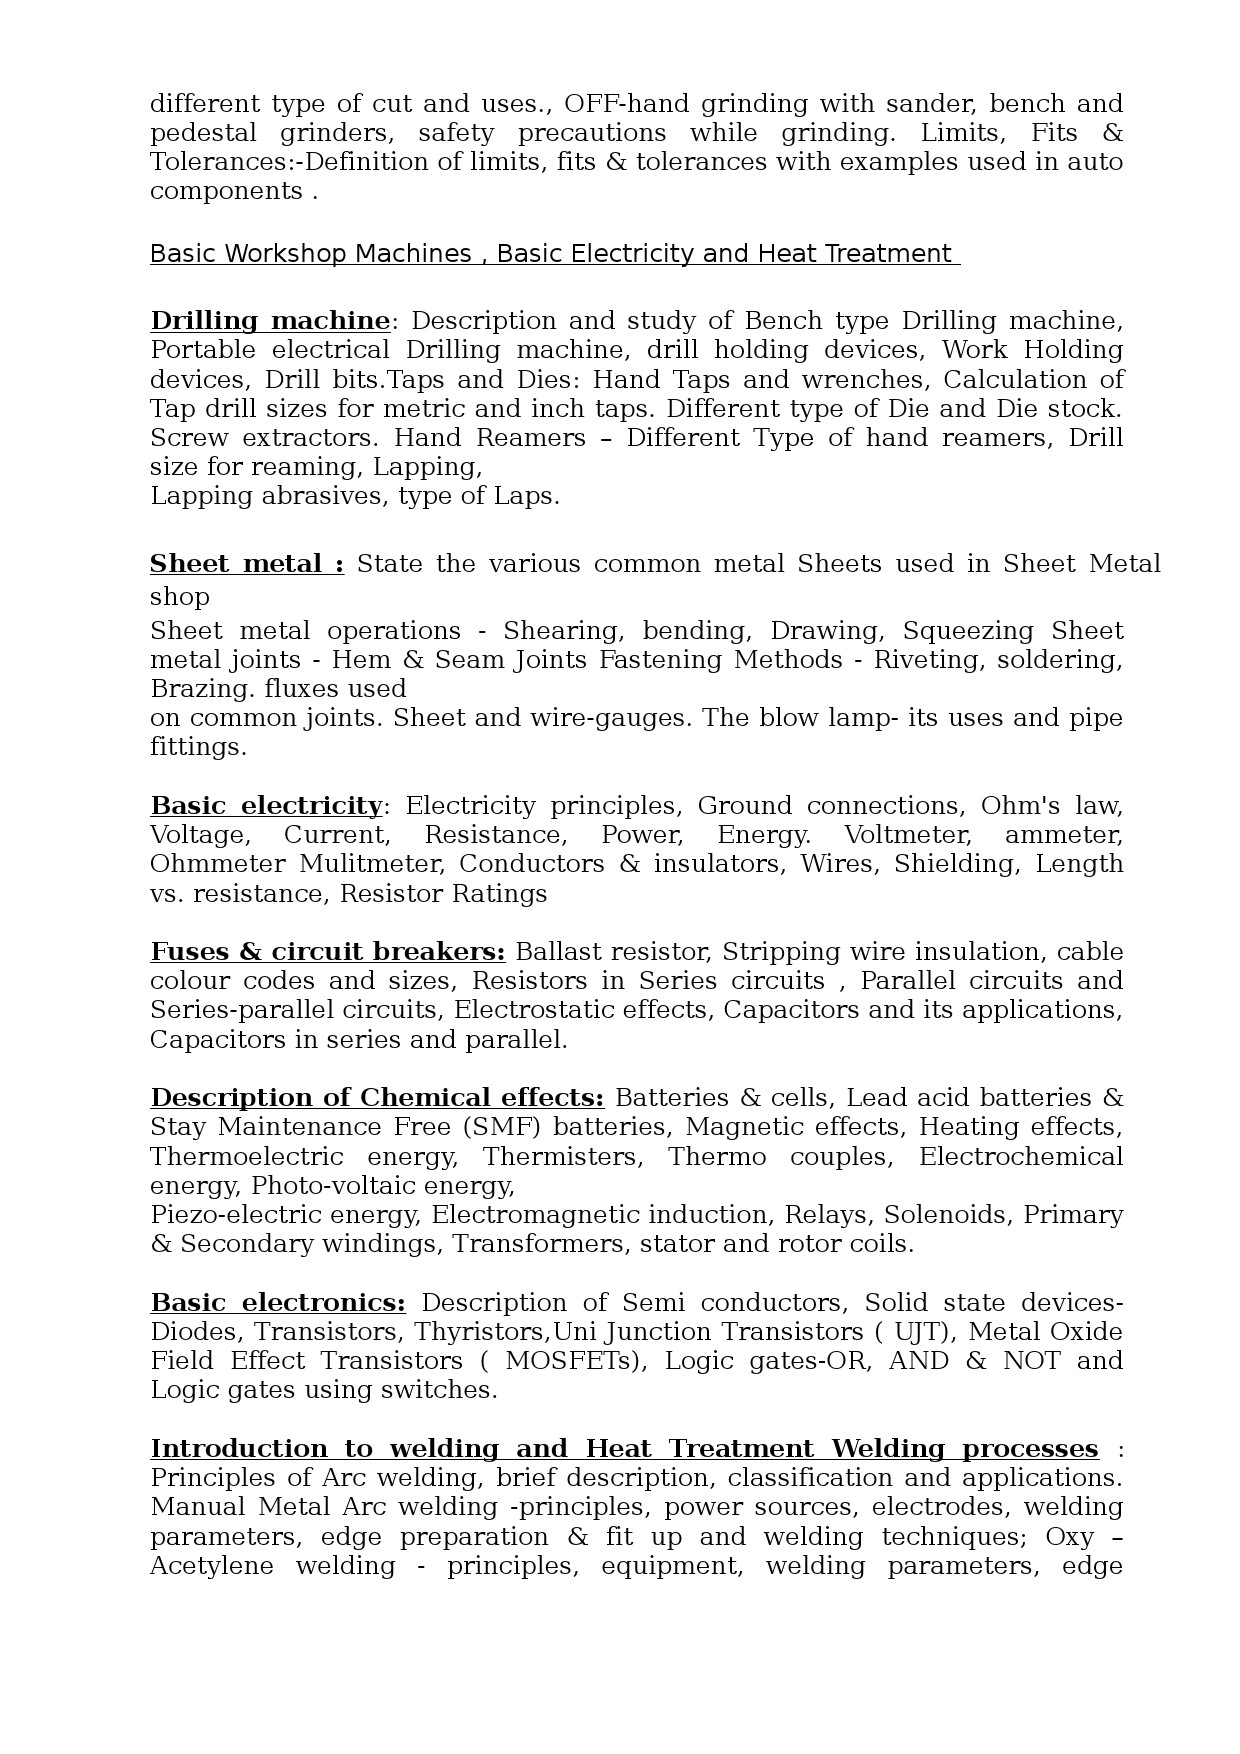 Junior Instructor Mechanical Agricultural Machinery KPSC Exam Syllabus May 2021 - Notification Image 2